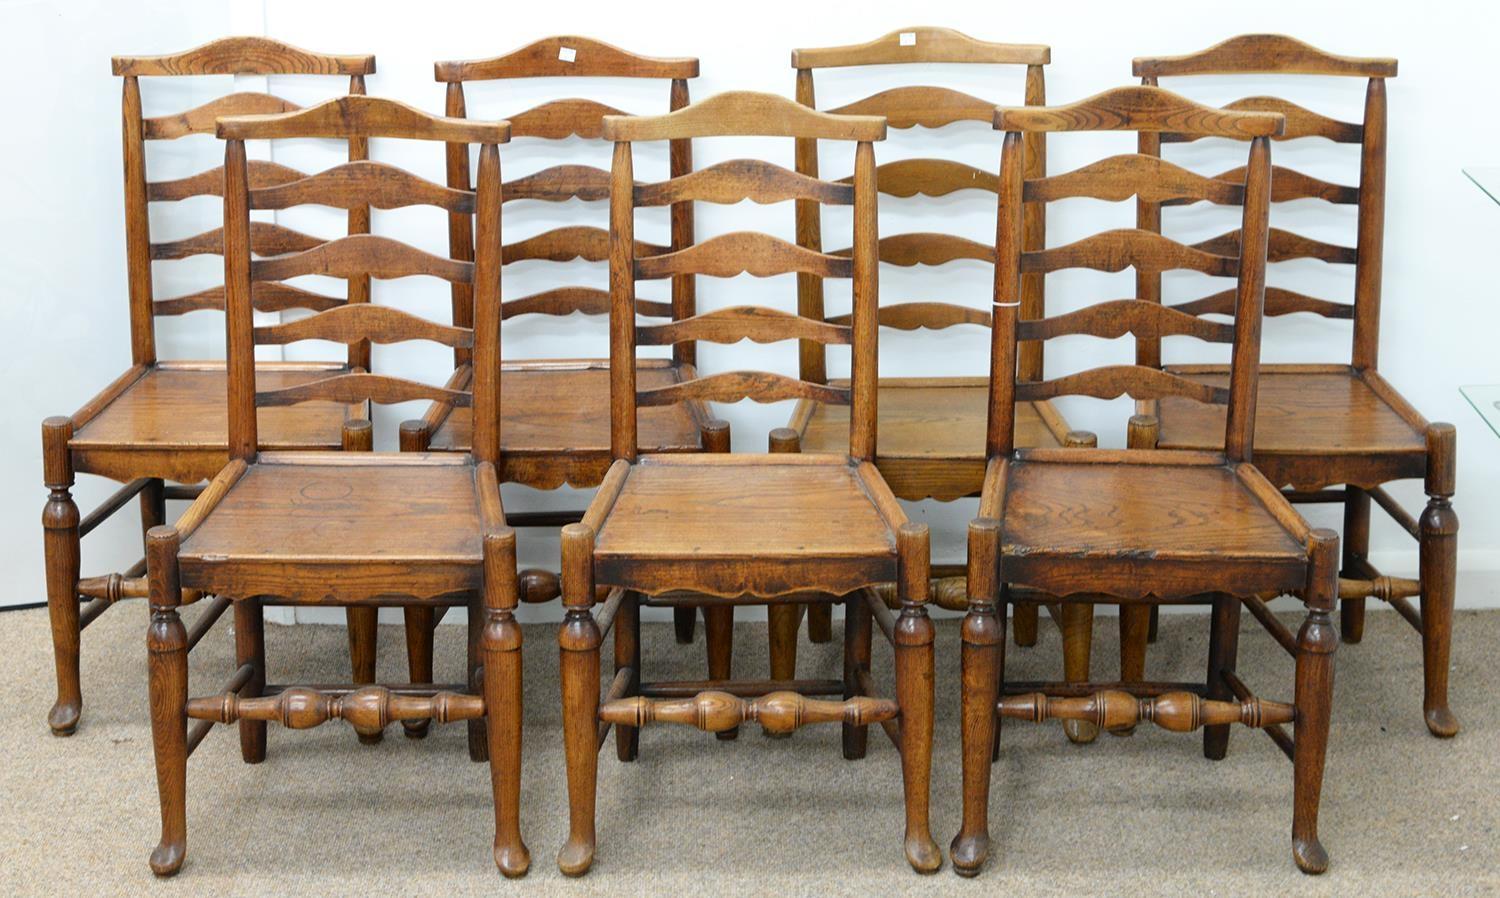 SEVEN VICTORIAN ASH LADDER BACK CHAIRS, NORTH WEST ENGLAND, MID 19TH C, WITH VASE TURNED STRETCHERS,